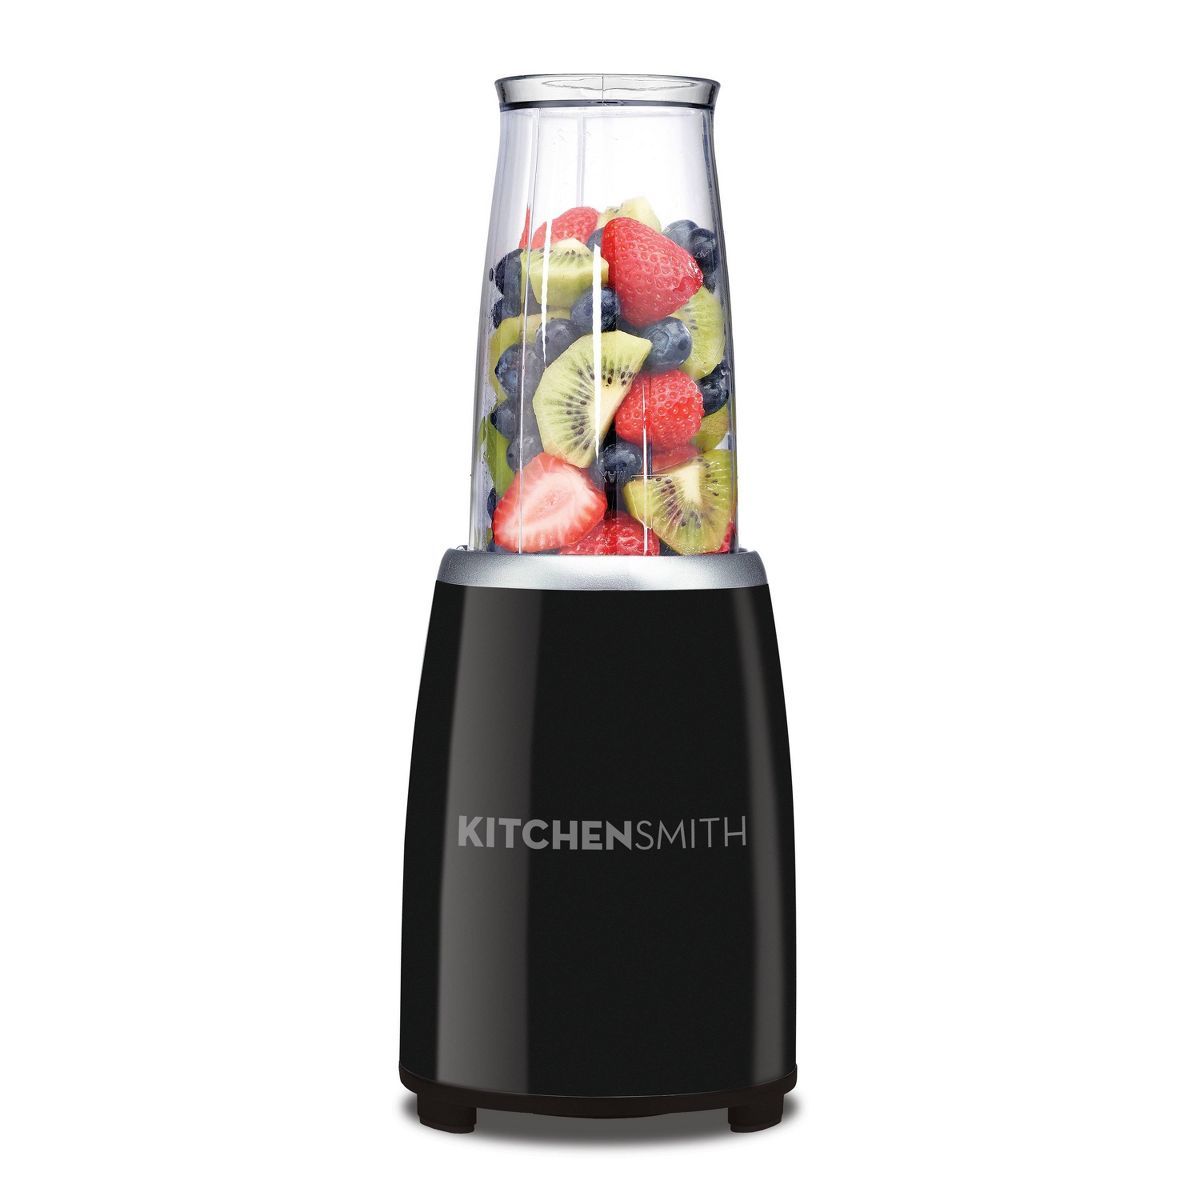 KitchenSmith by Bella 8pc Personal Blender System | Target